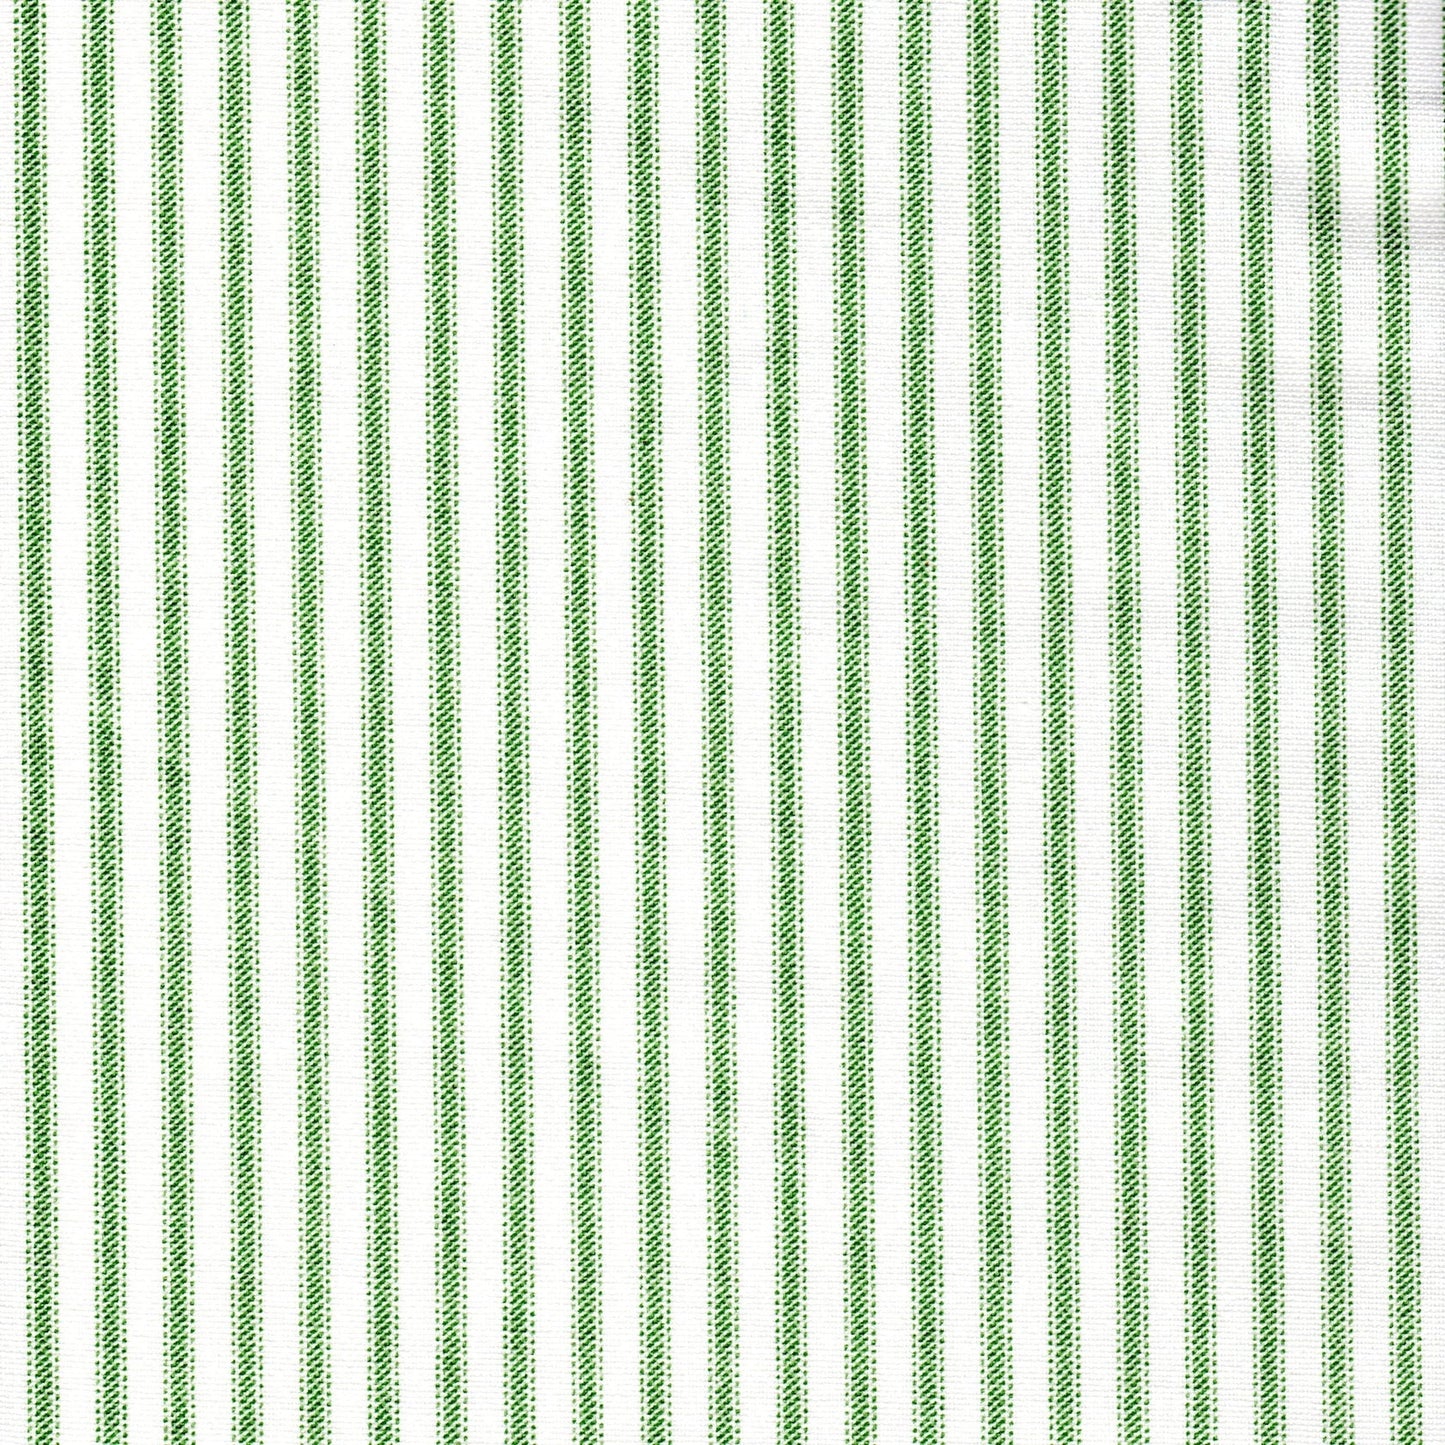 tie-up valance in Classic Pine Green Ticking Stripe on White